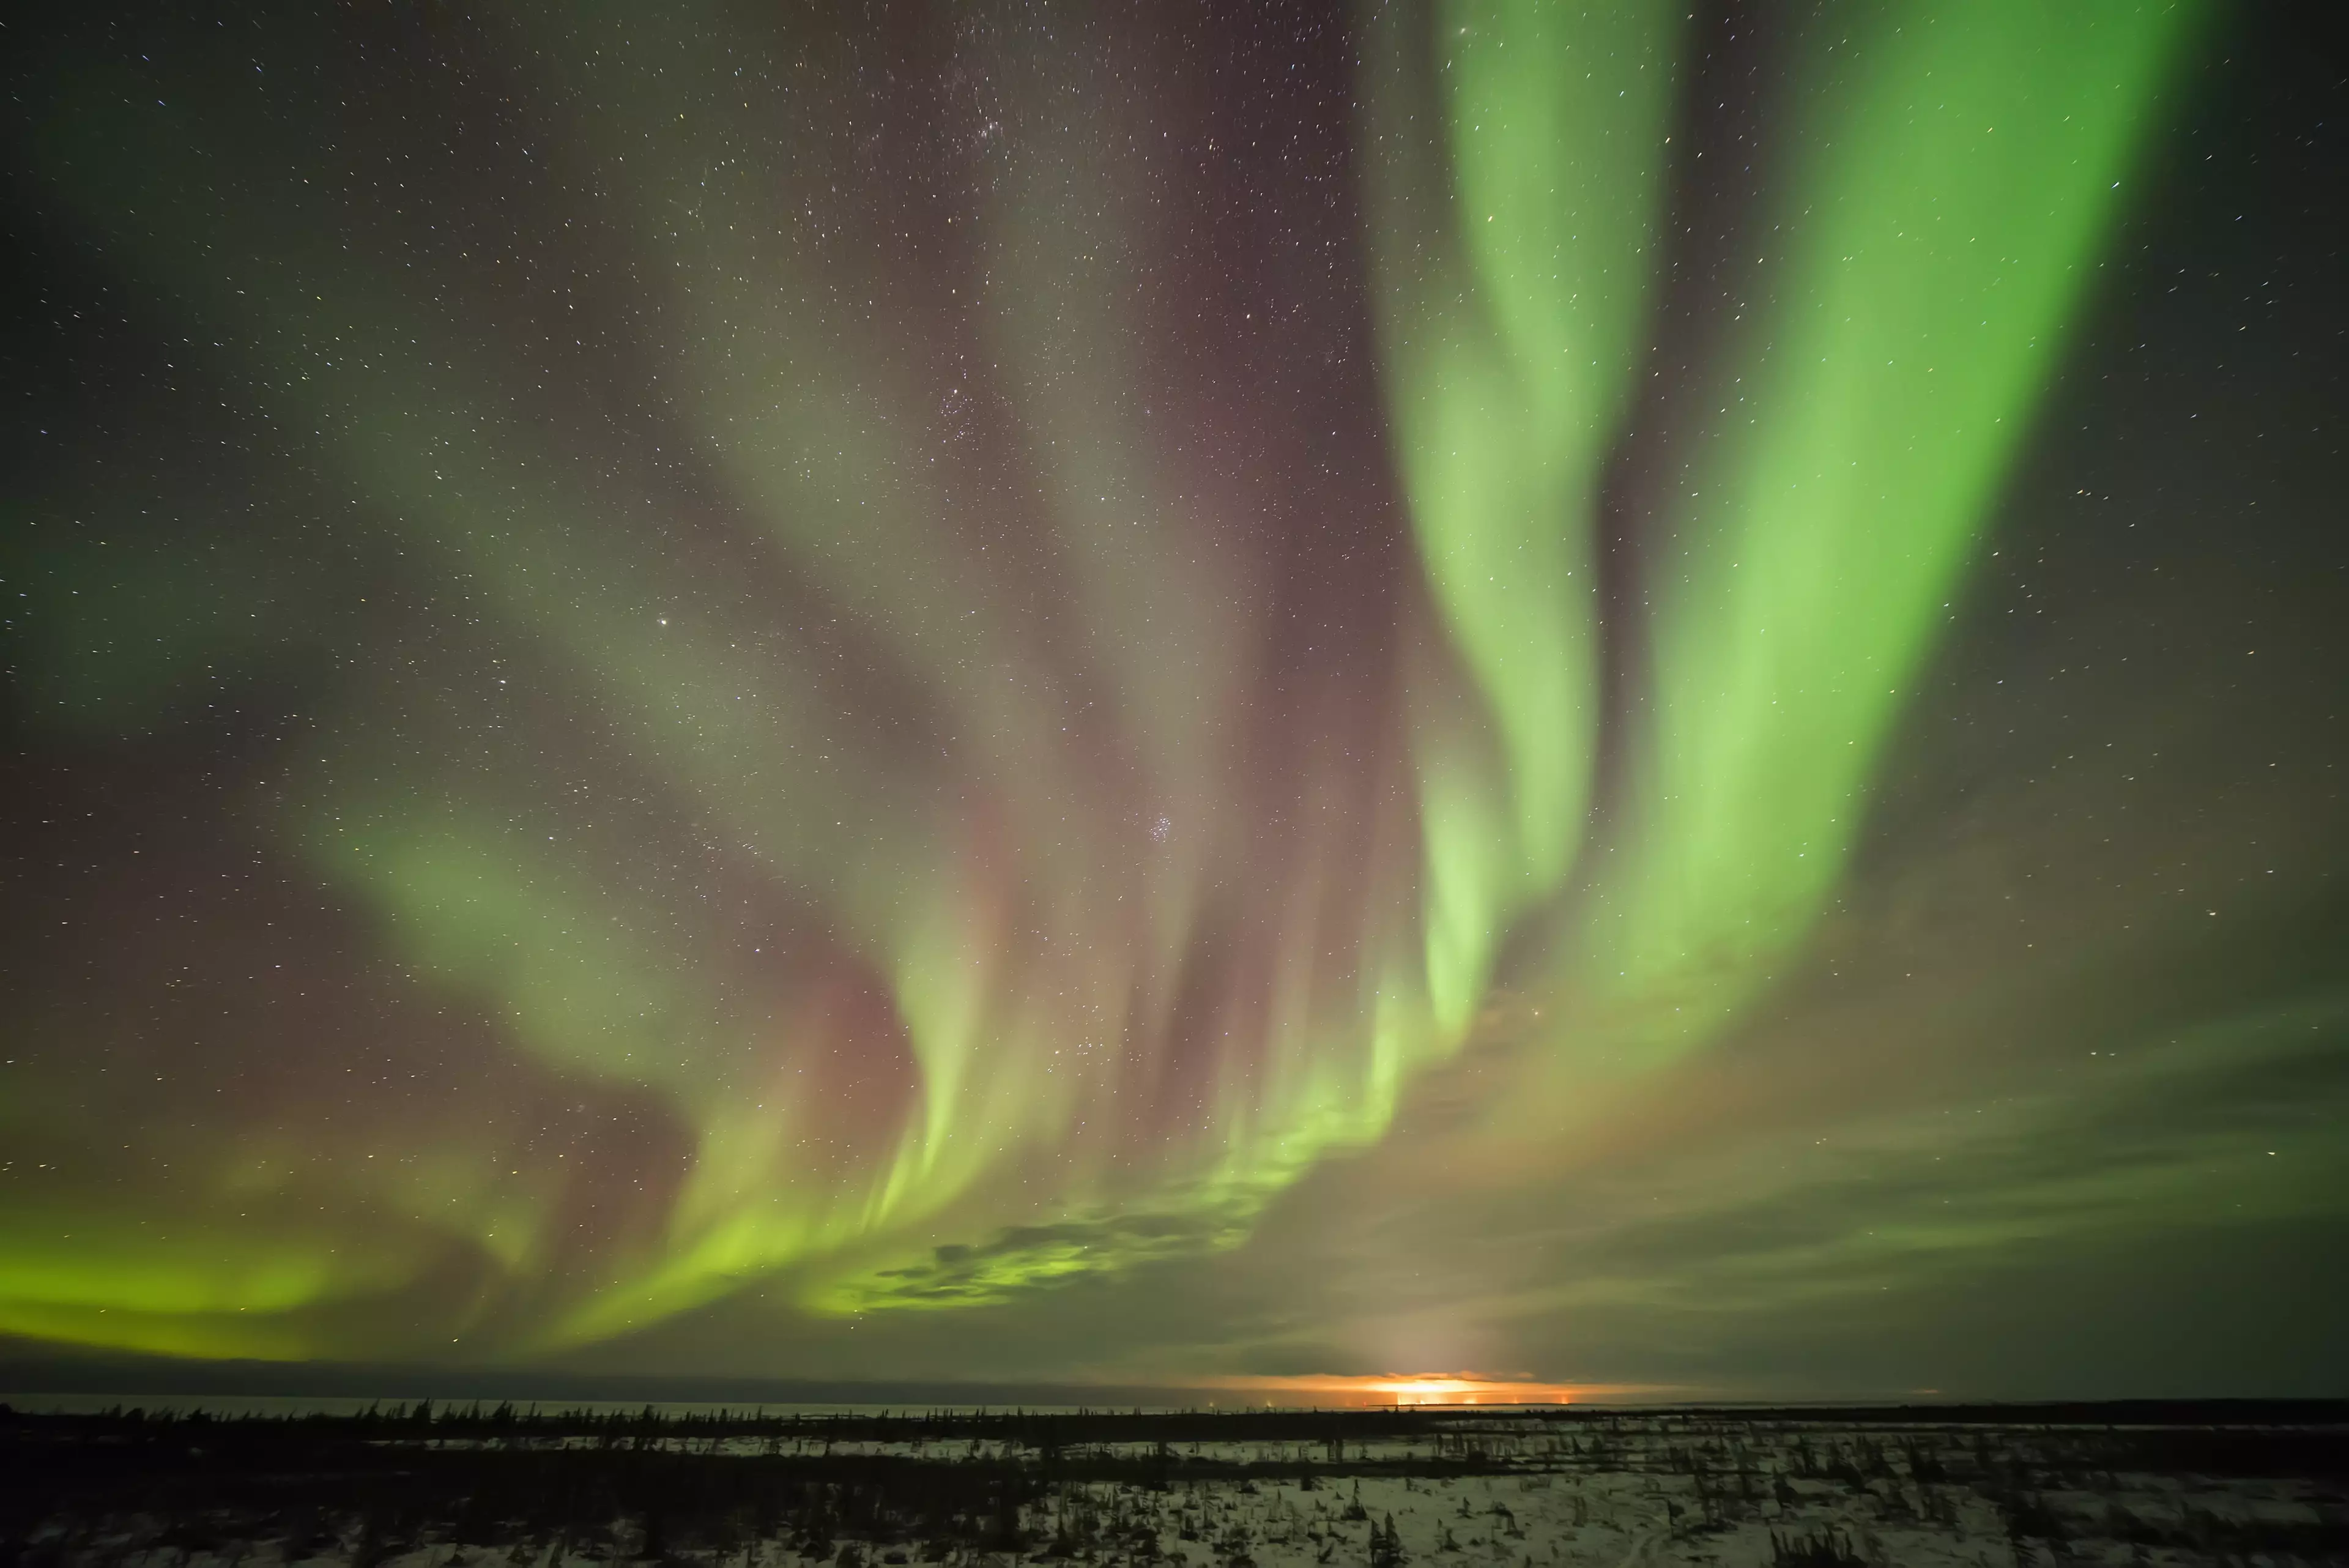 Bands of Northern Lights in the skies near Churchill in Manitoba, Canada.